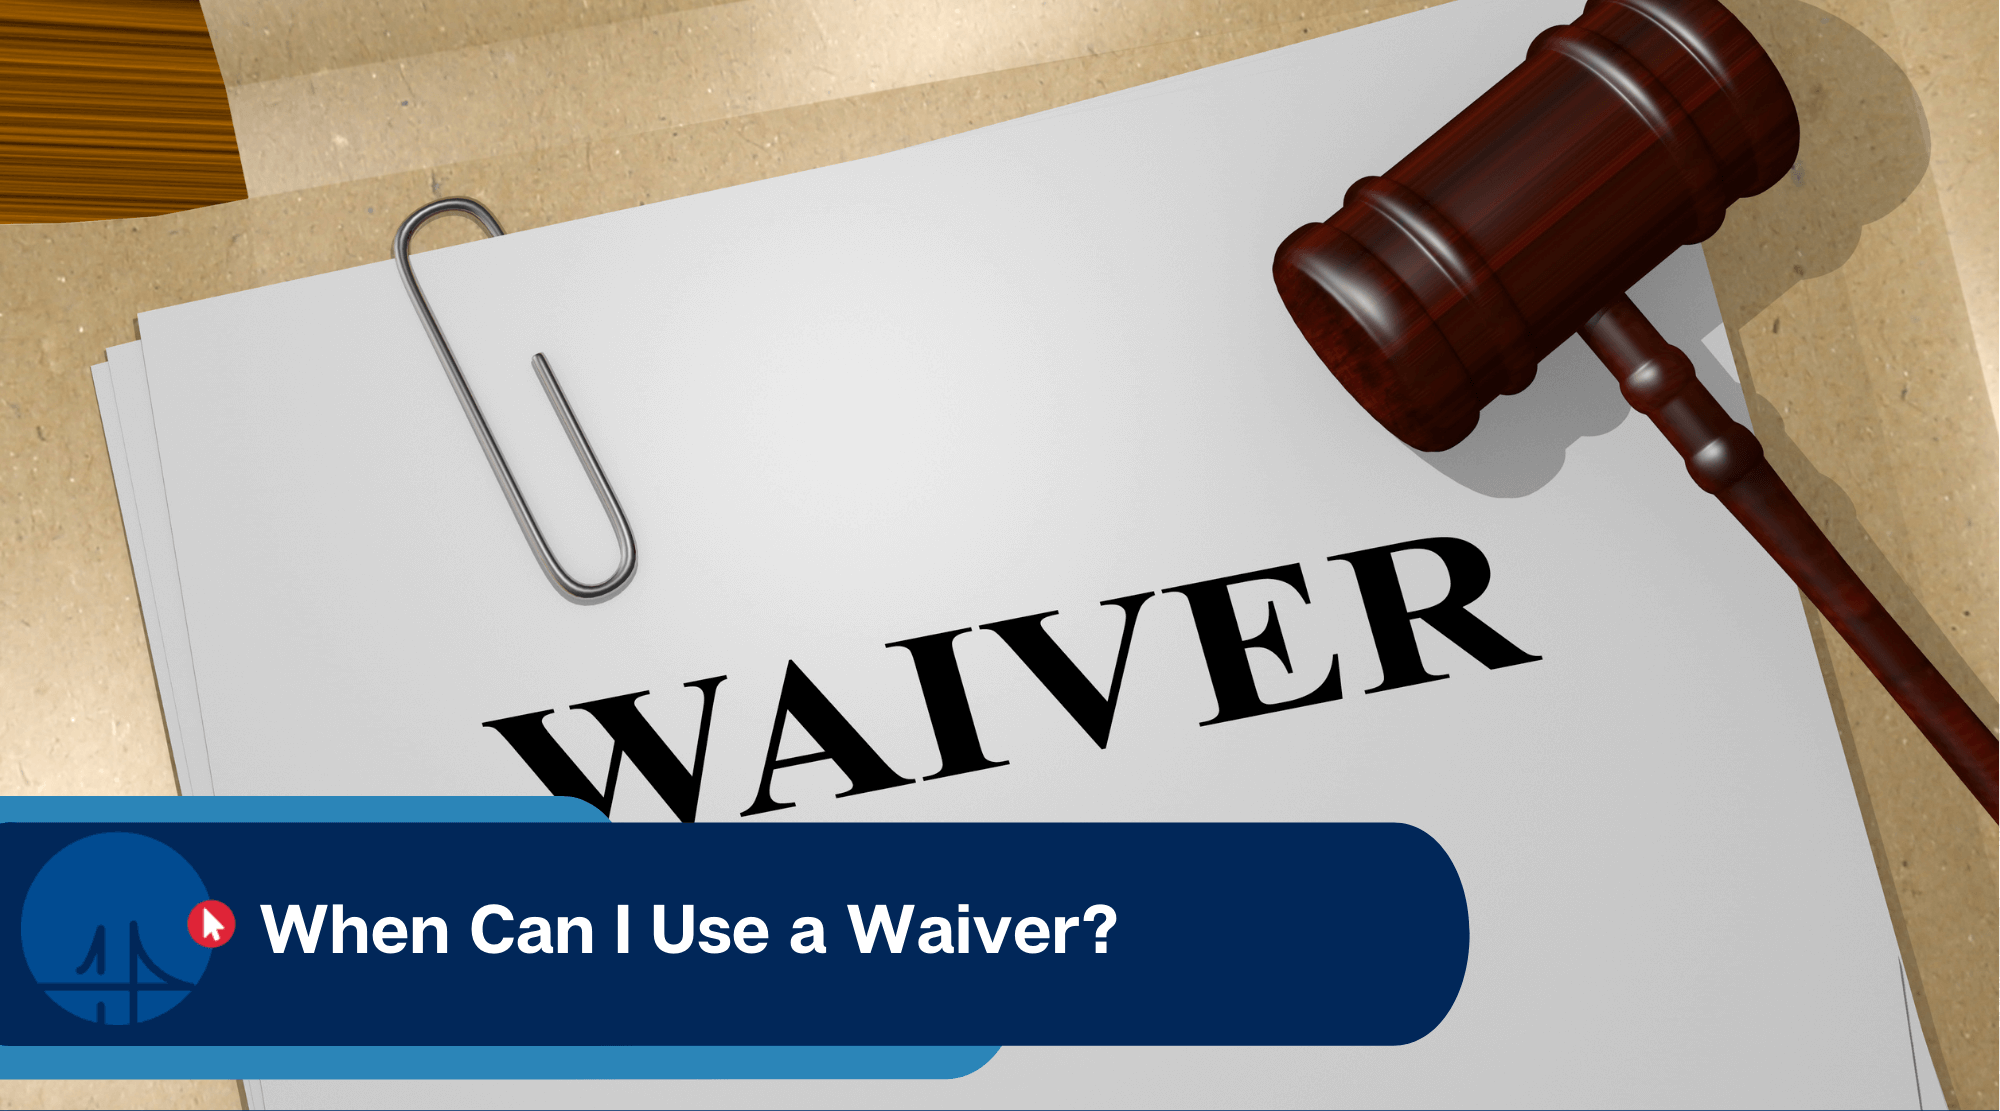 When can I use a Waiver?